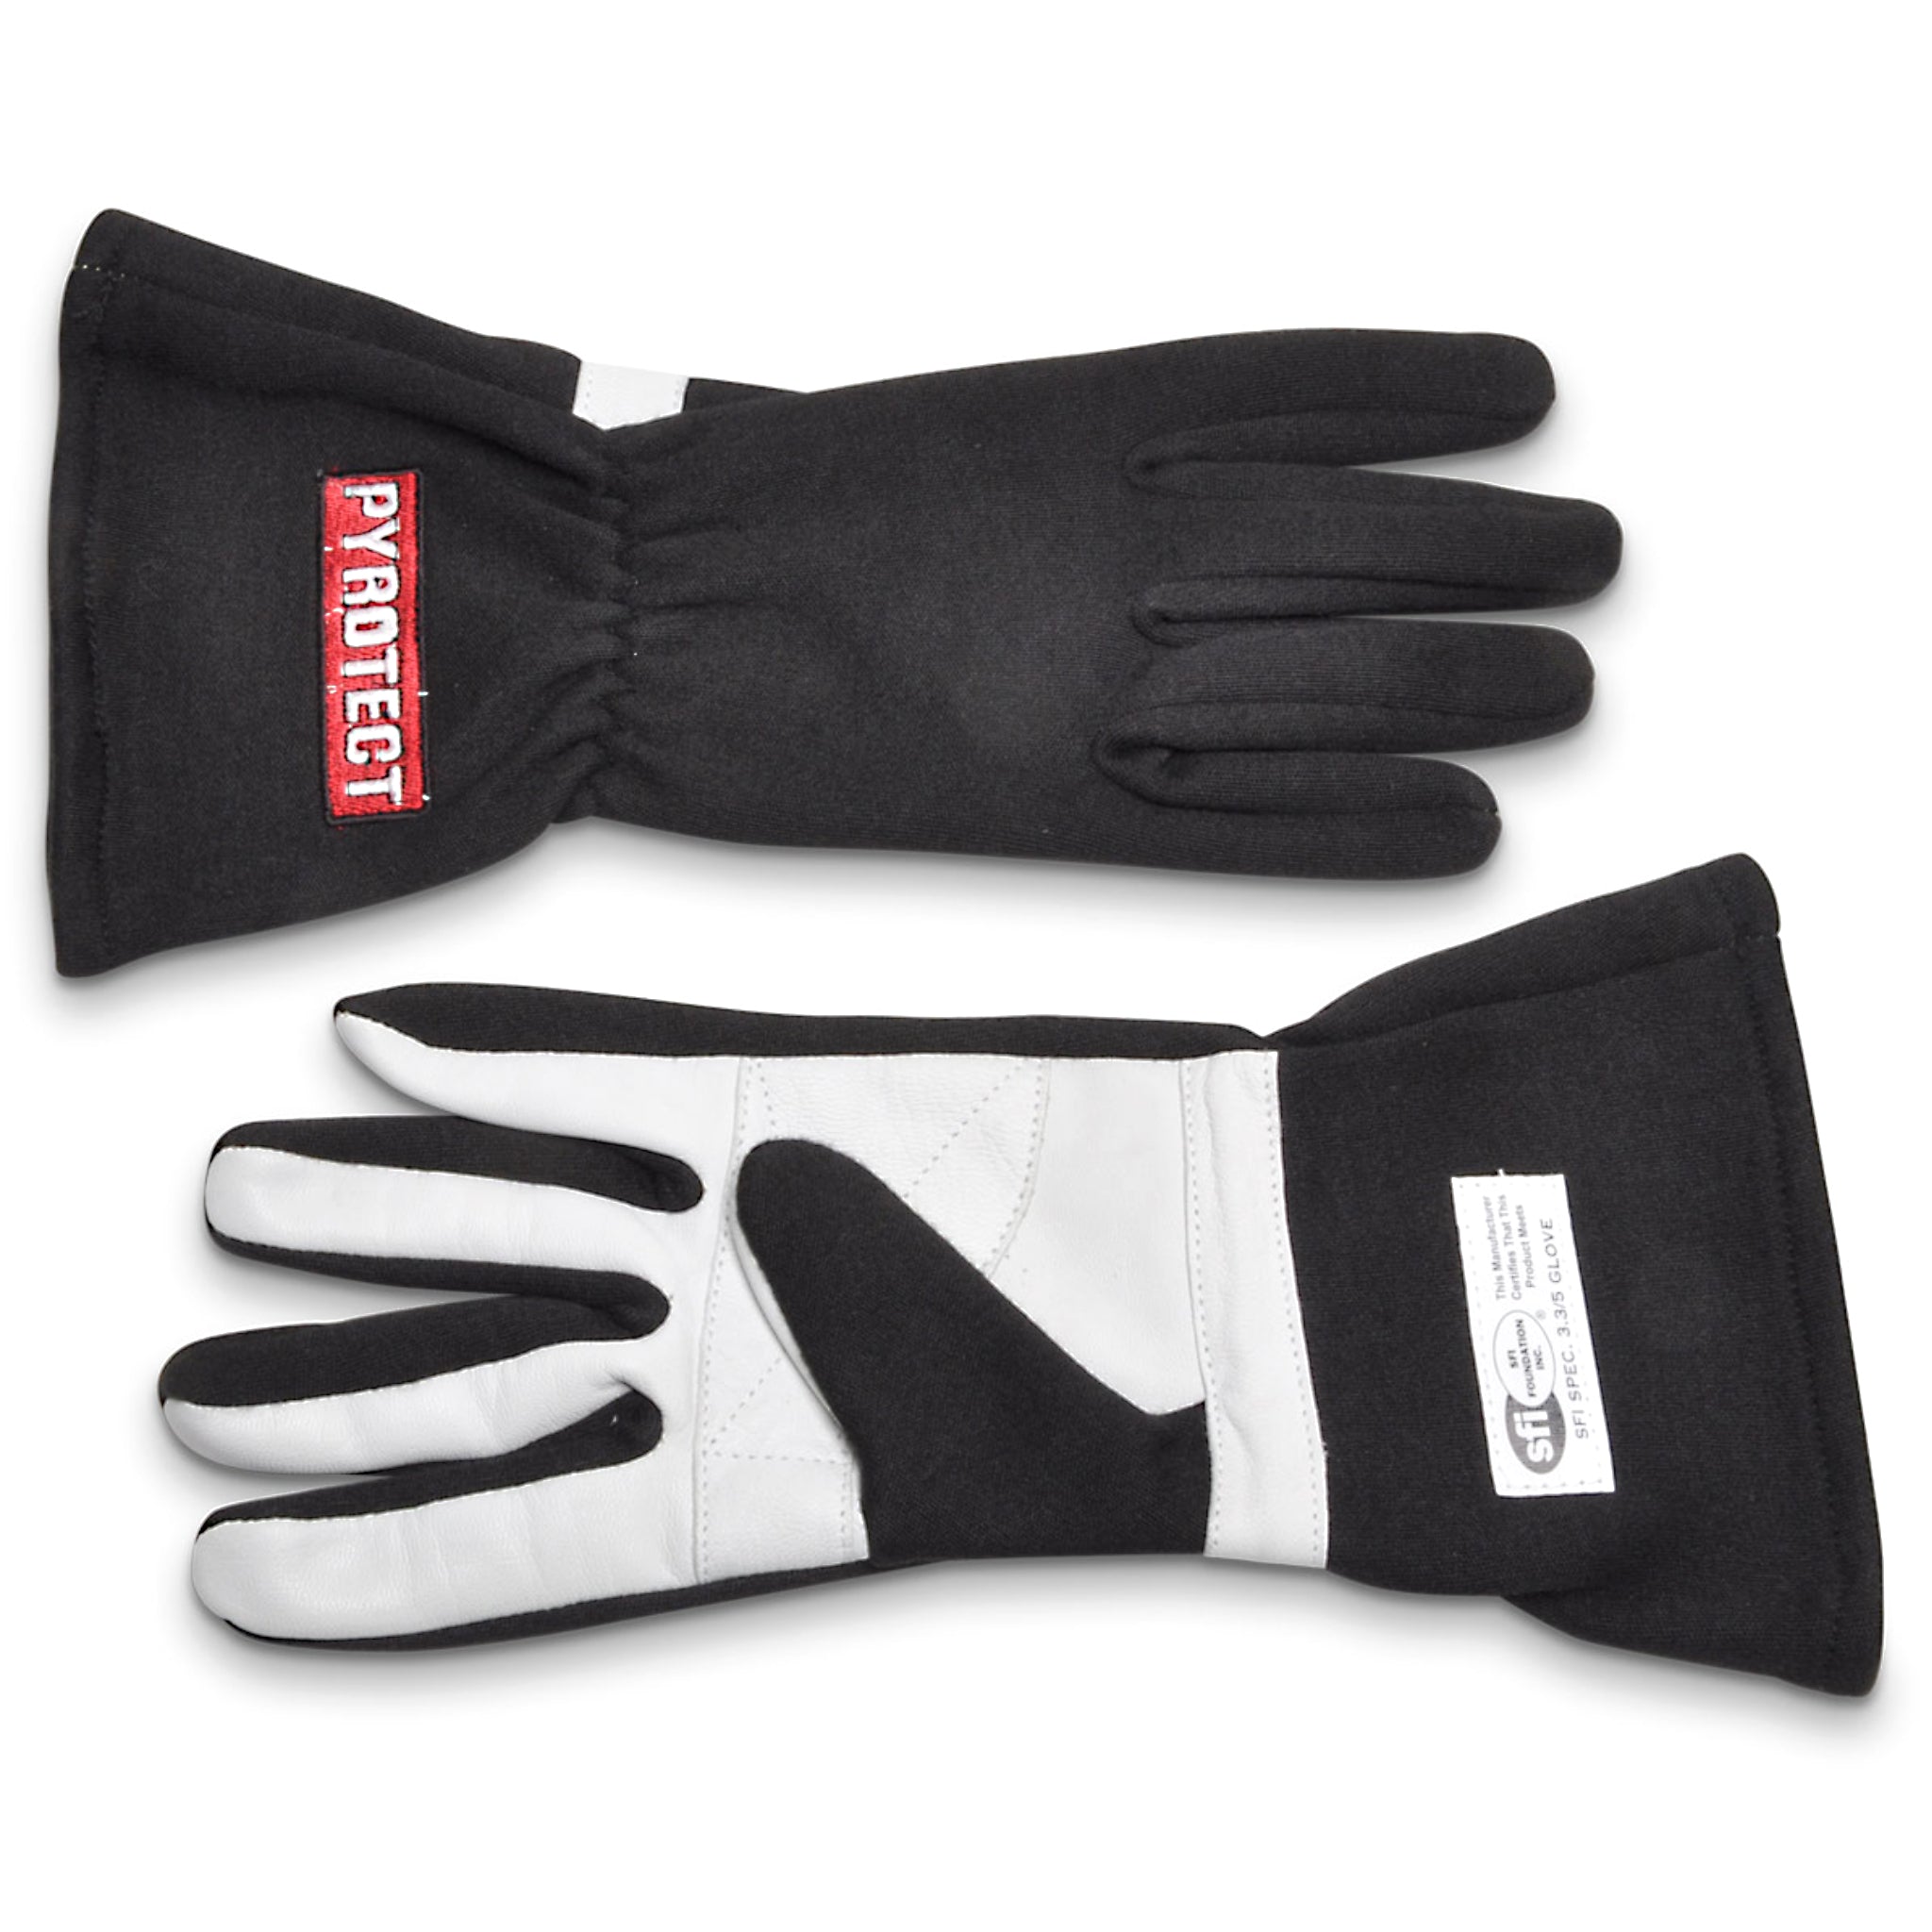 Pyrotect Glove Sport 1 Layer Blk Large SFI-1 Safety Clothing Driving Gloves main image